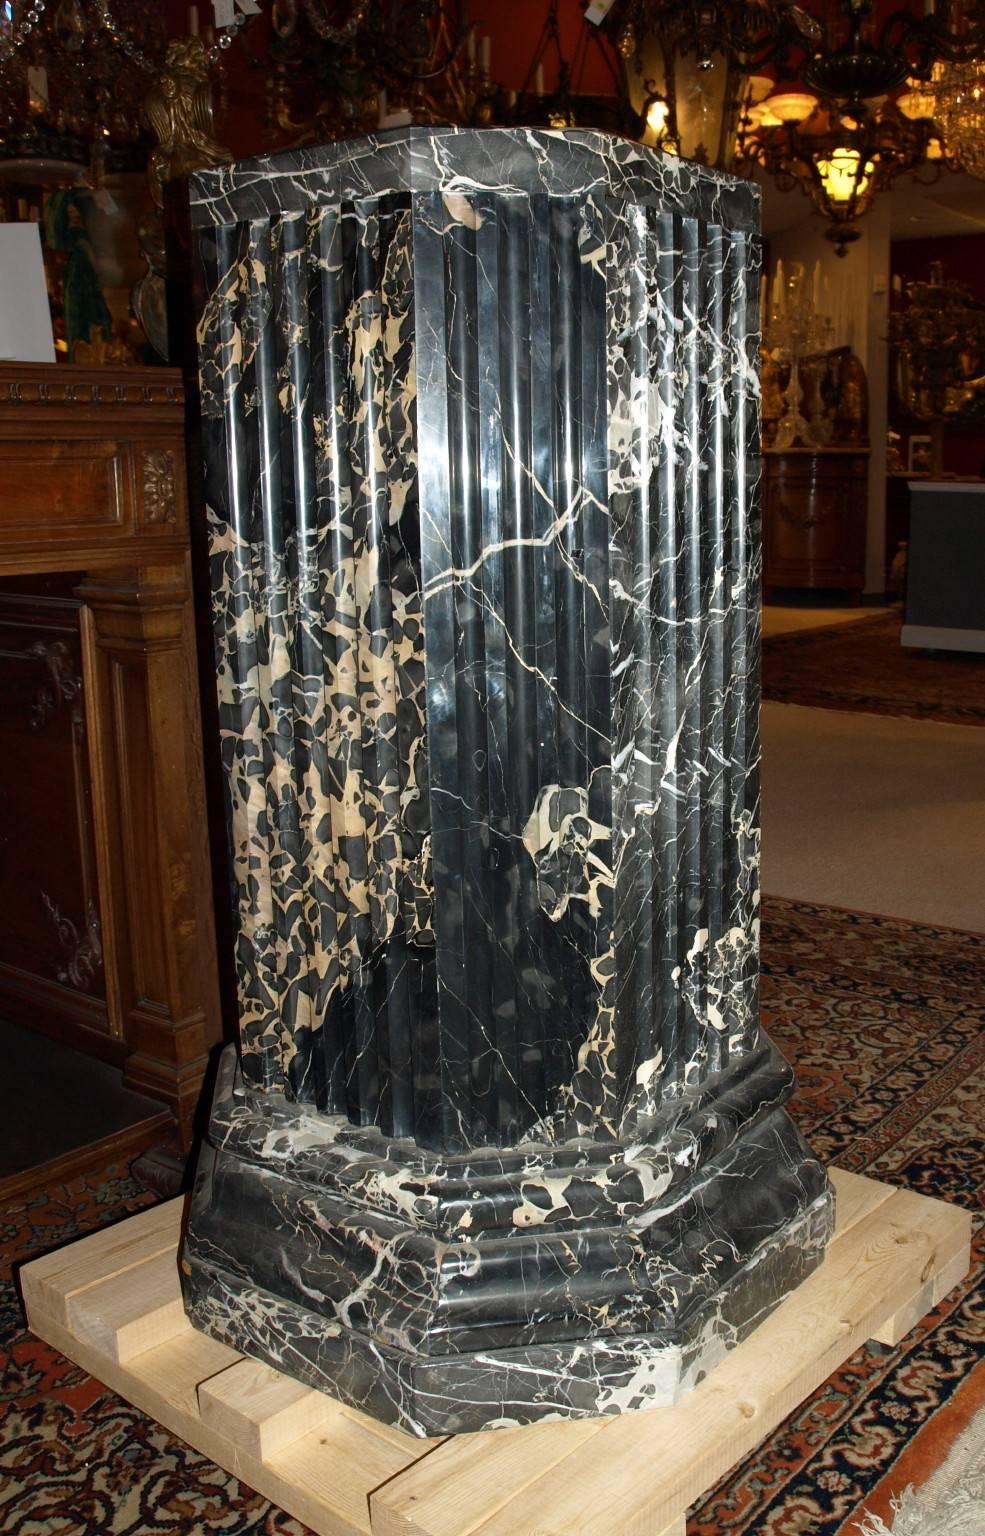 Very fine pair of portoro marble pedestals having an octagonal shape with reeded center pillar. The top is 18 inches by 18 inches. The base is 24 inches by 24 inches.
CW4381 & CW4930
Portoro is a fine-grained, black marble with gold veining